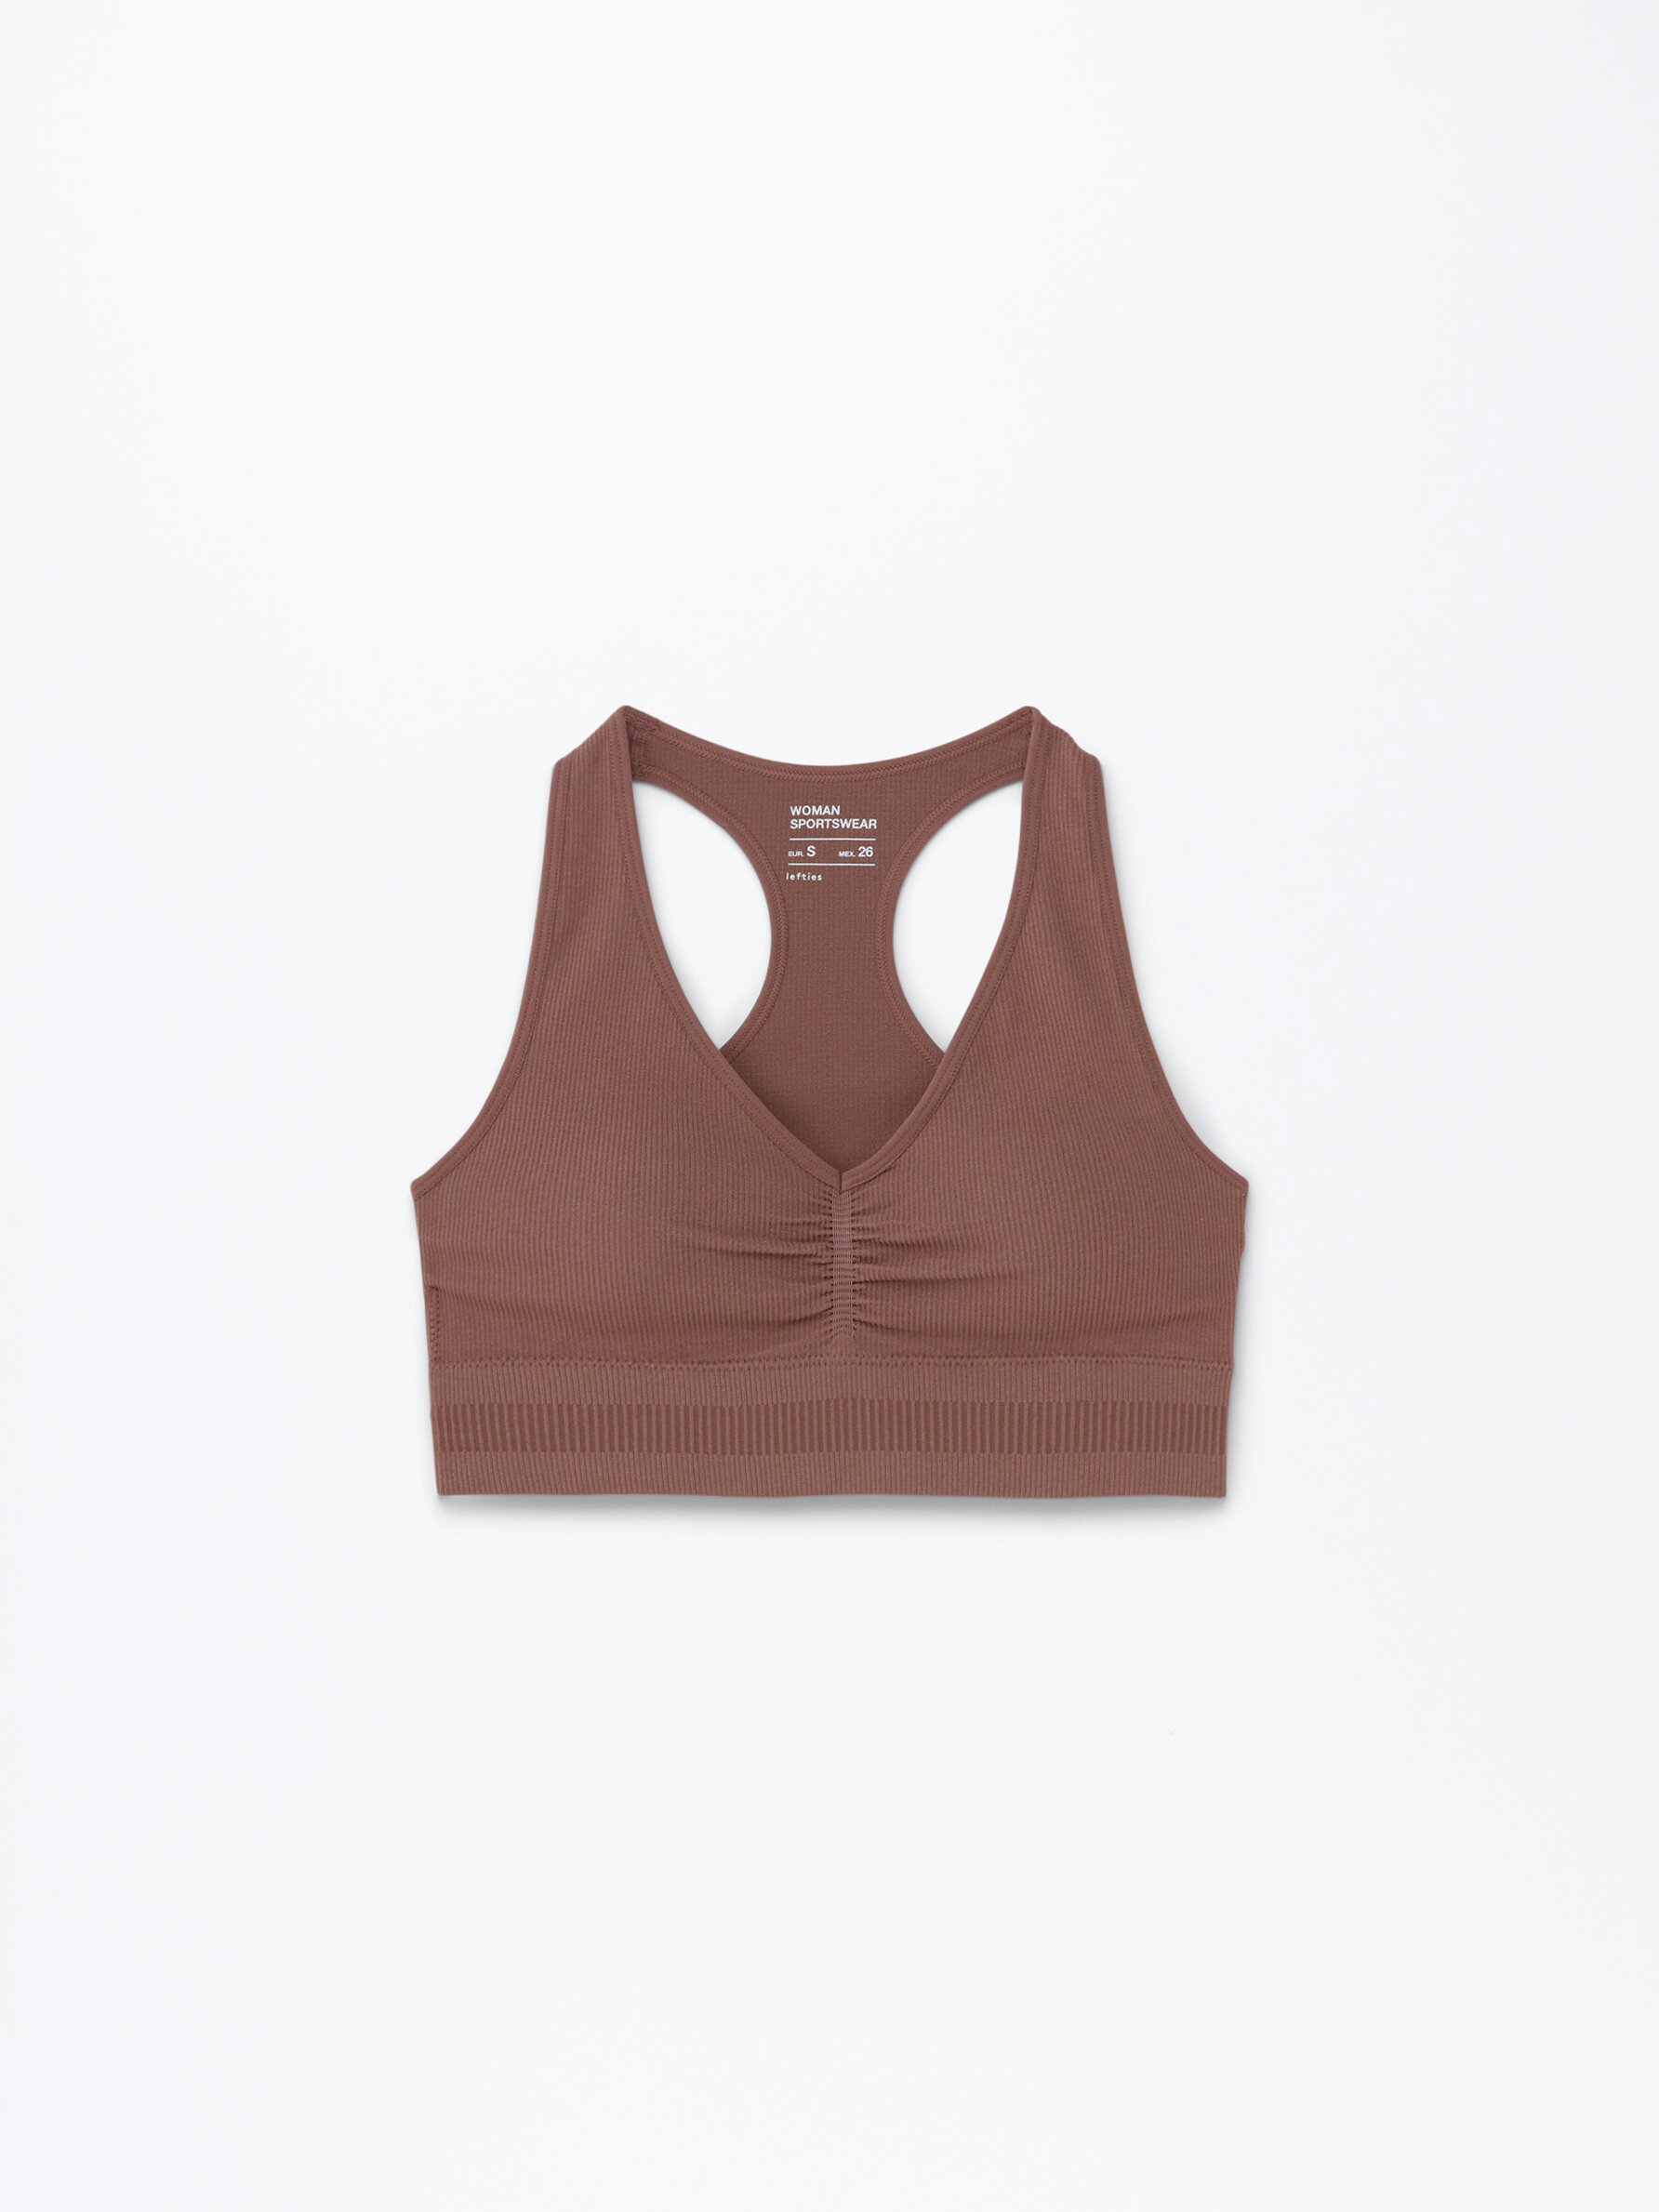 Seamless sports top - NEW IN - Woman 